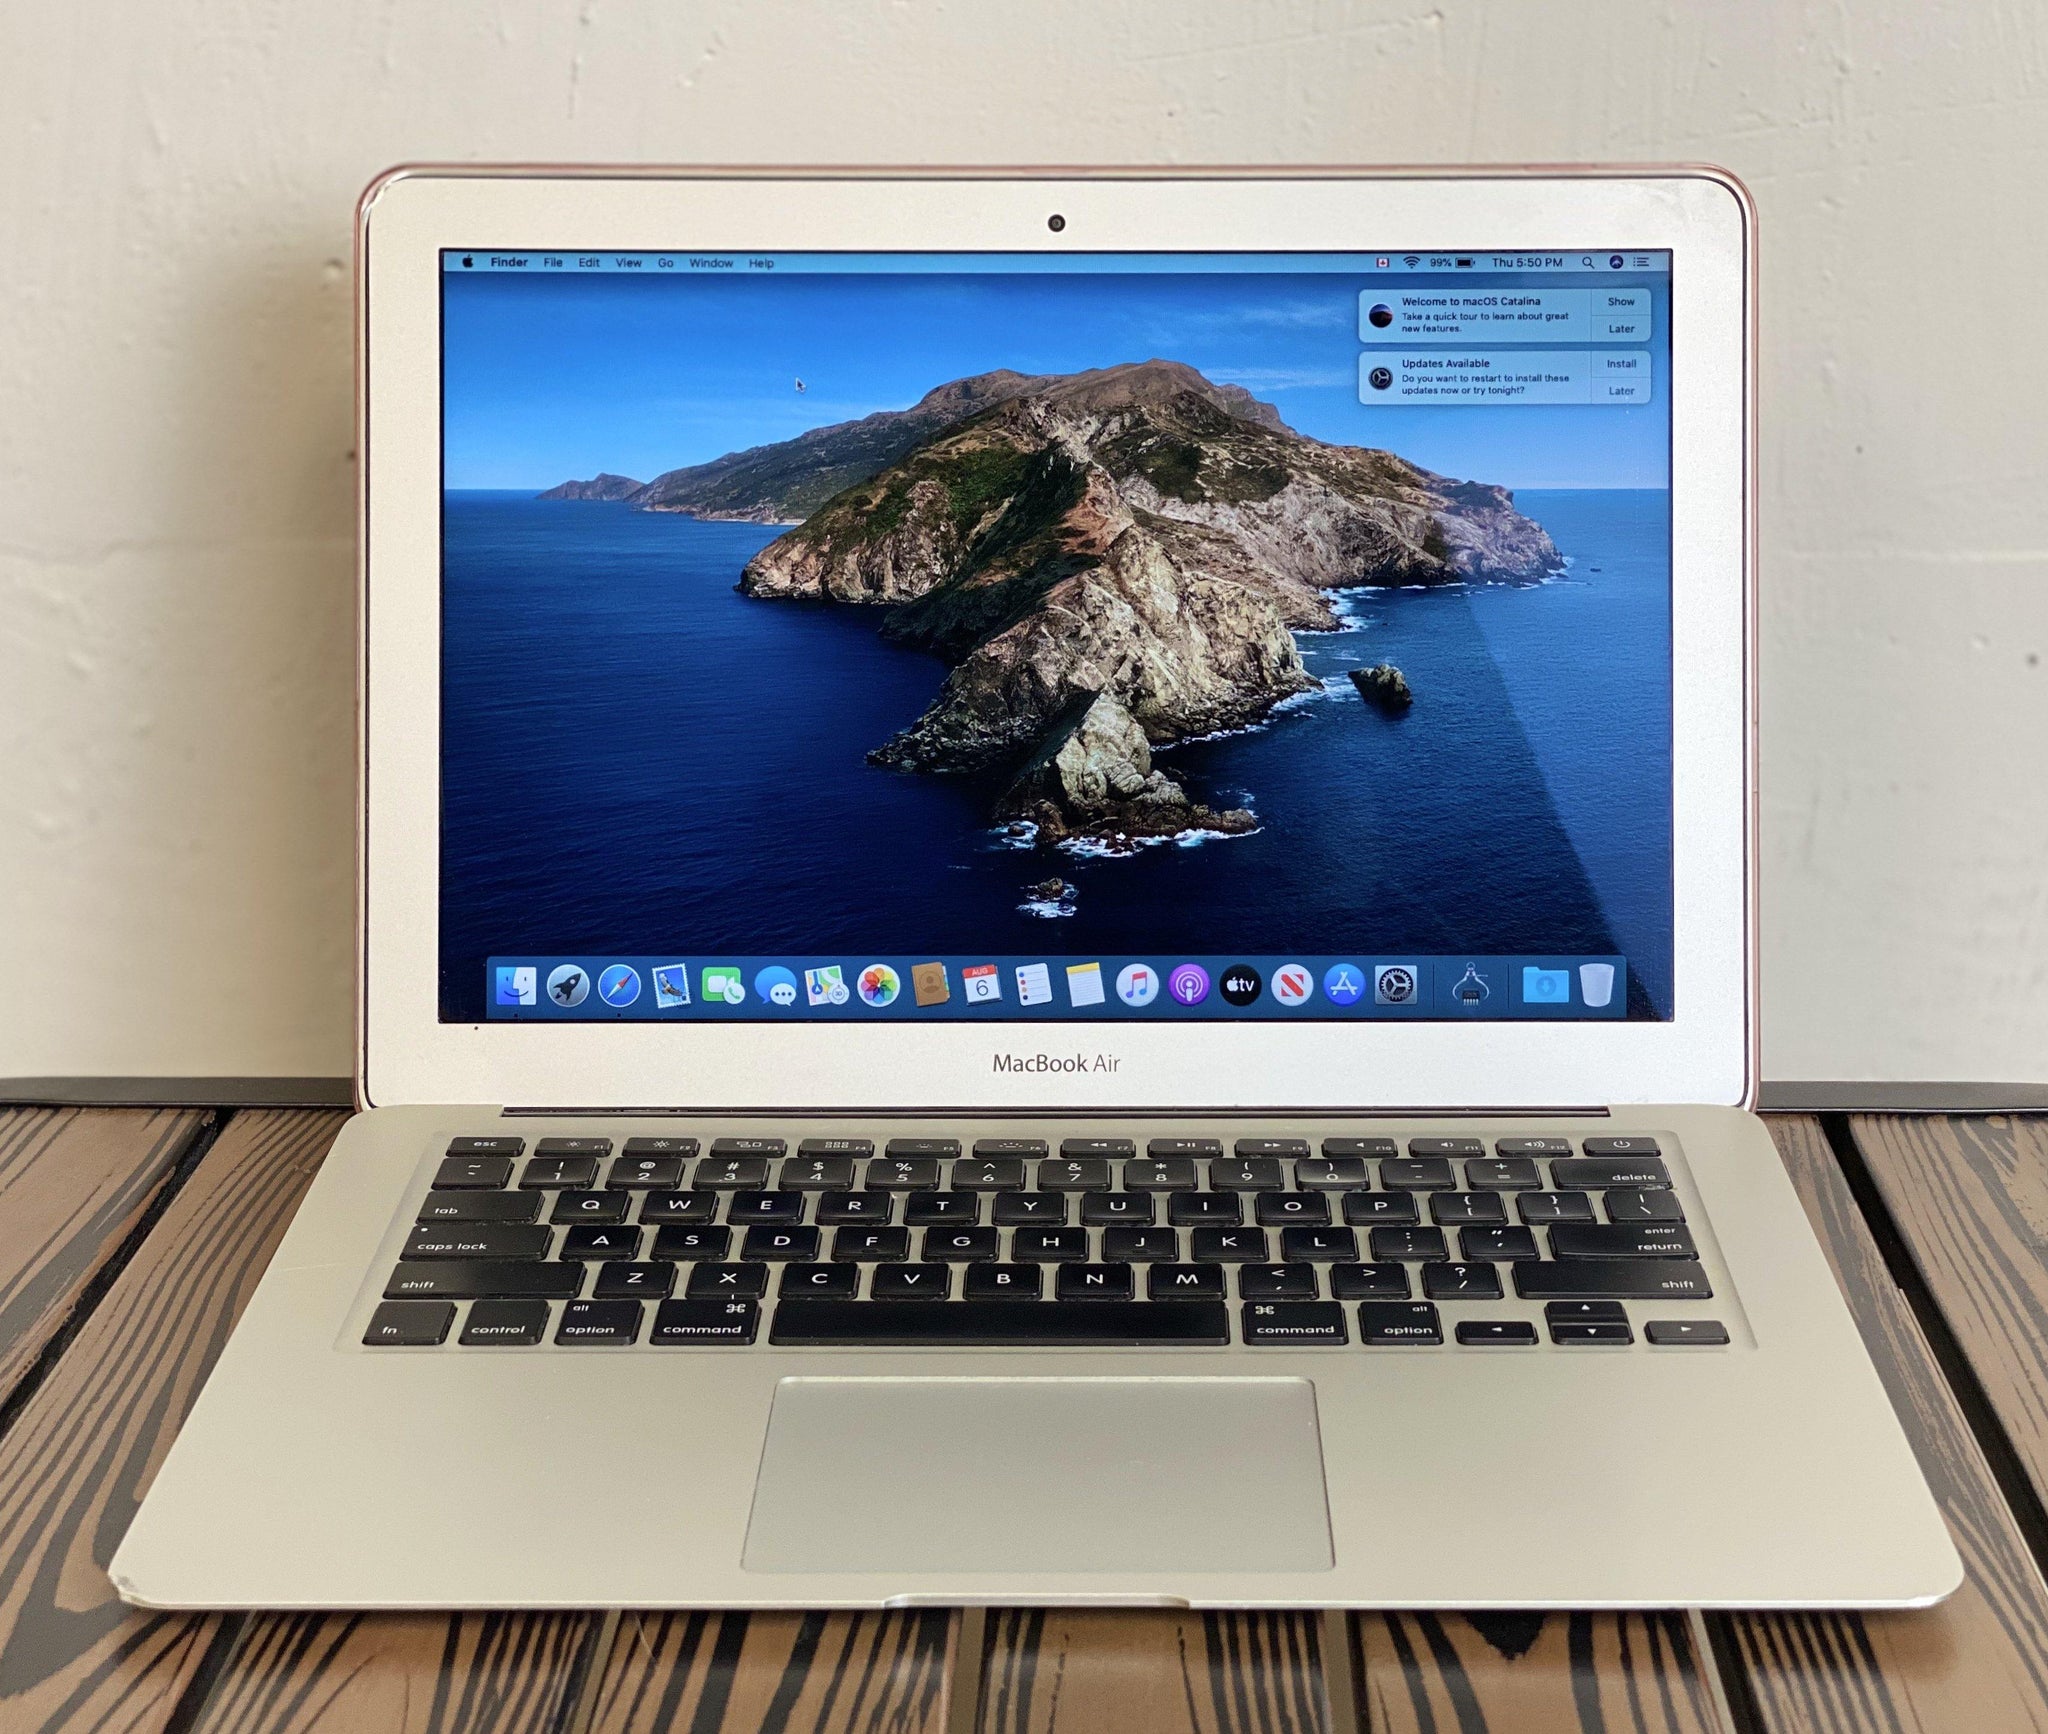 Sale Macbook Air 13 Inch Early 15 Pcmaster Pro Pcmaster Pro